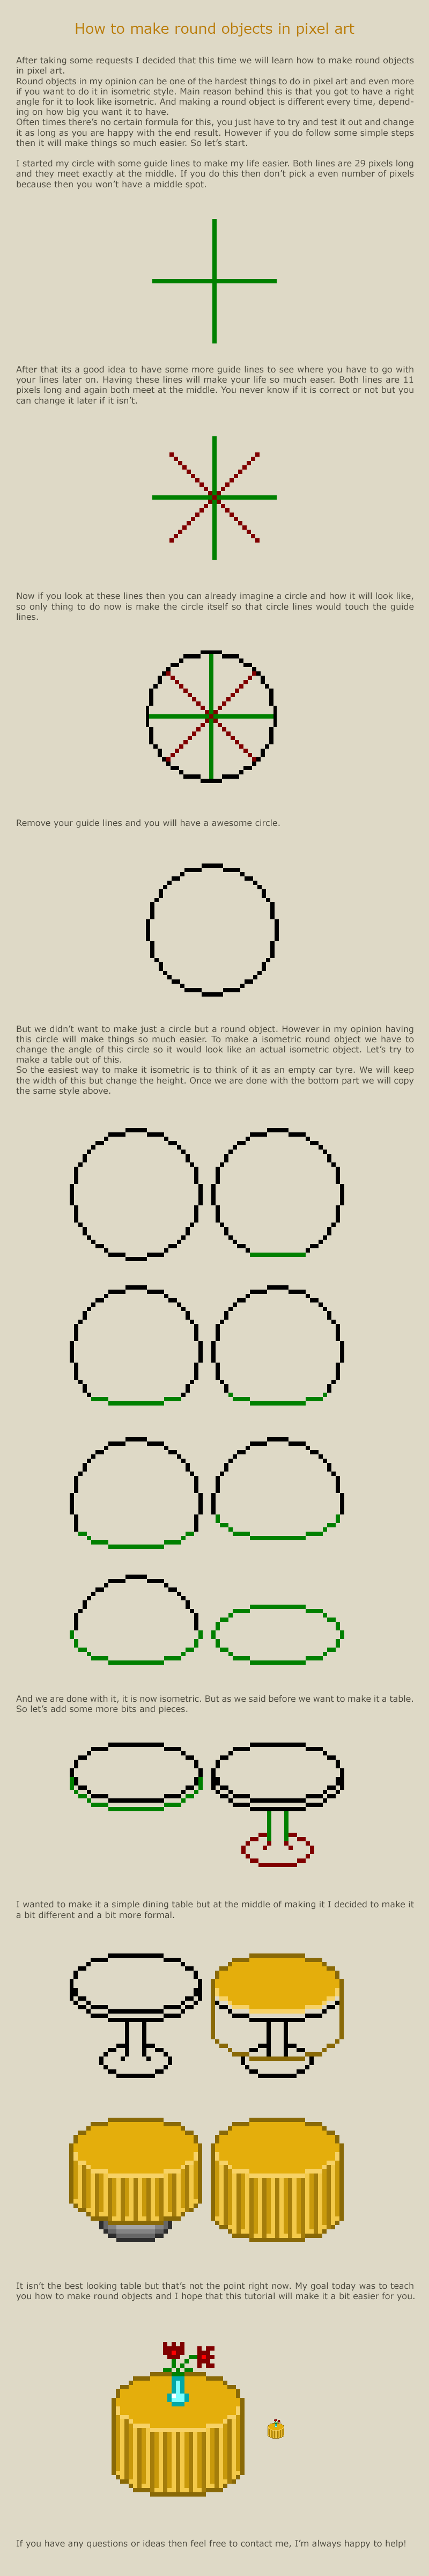 How to make round objects in pixel art